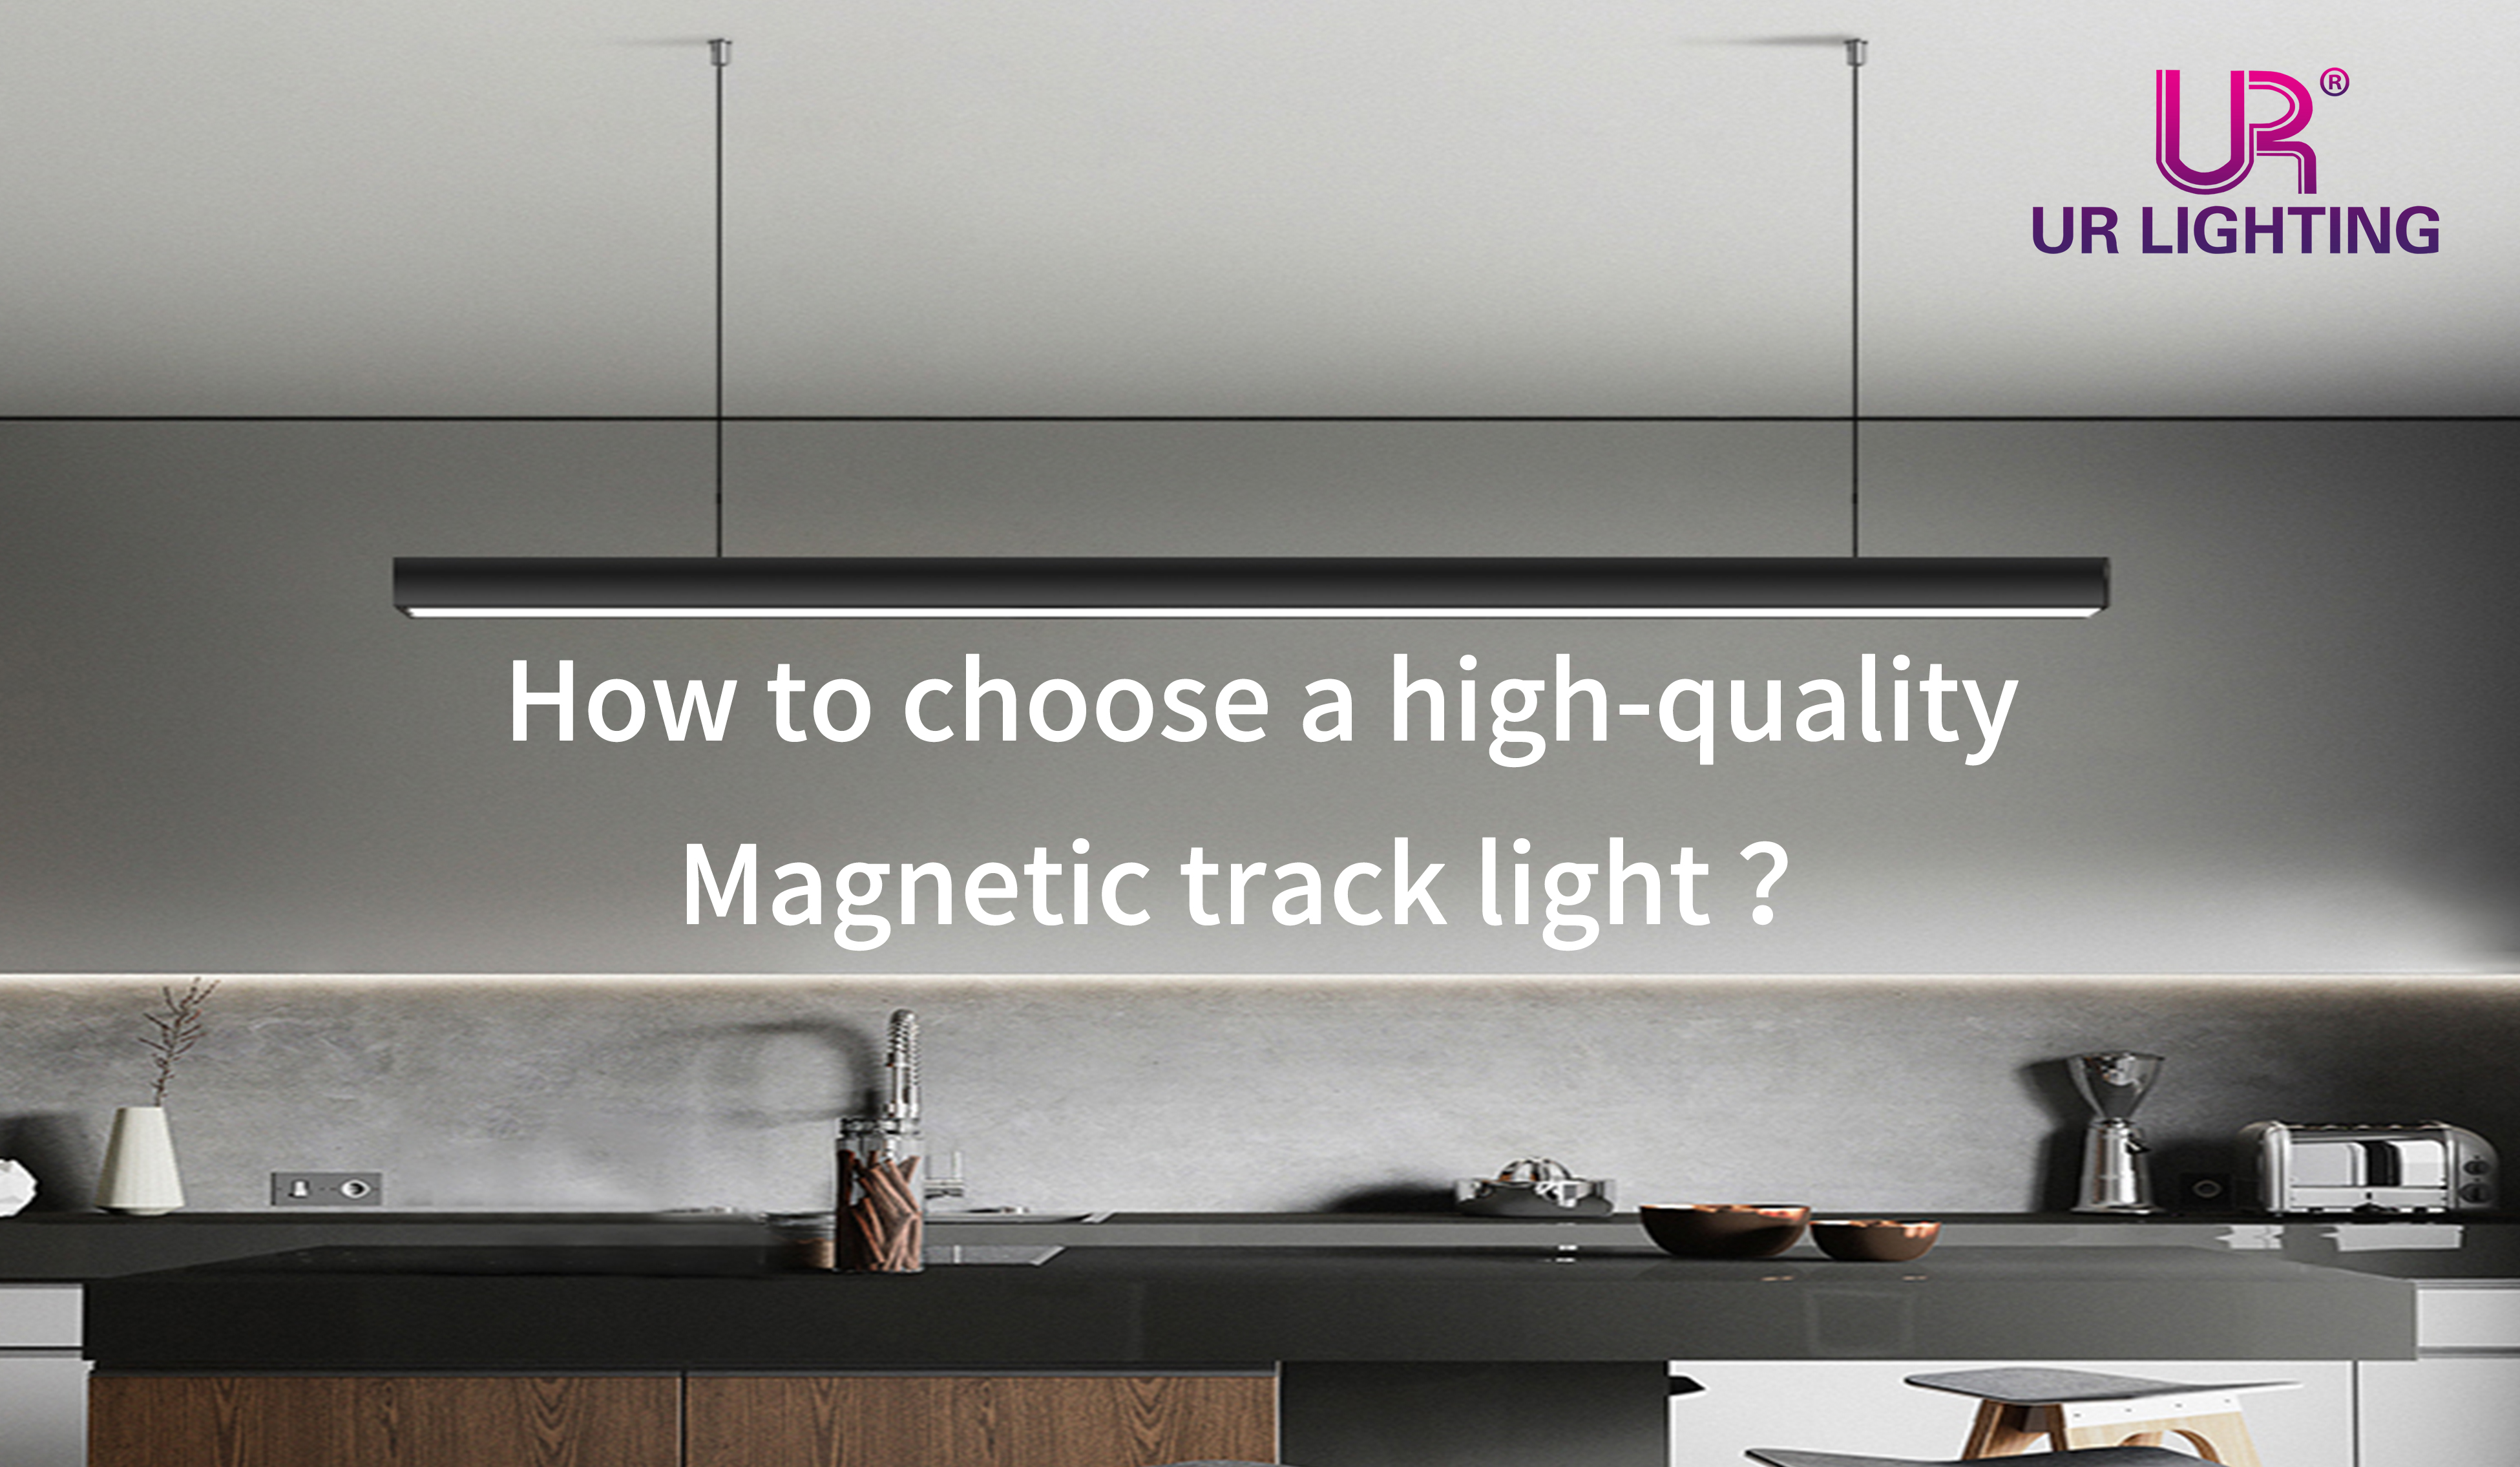 How to choose a high-quality Magnetic track light?